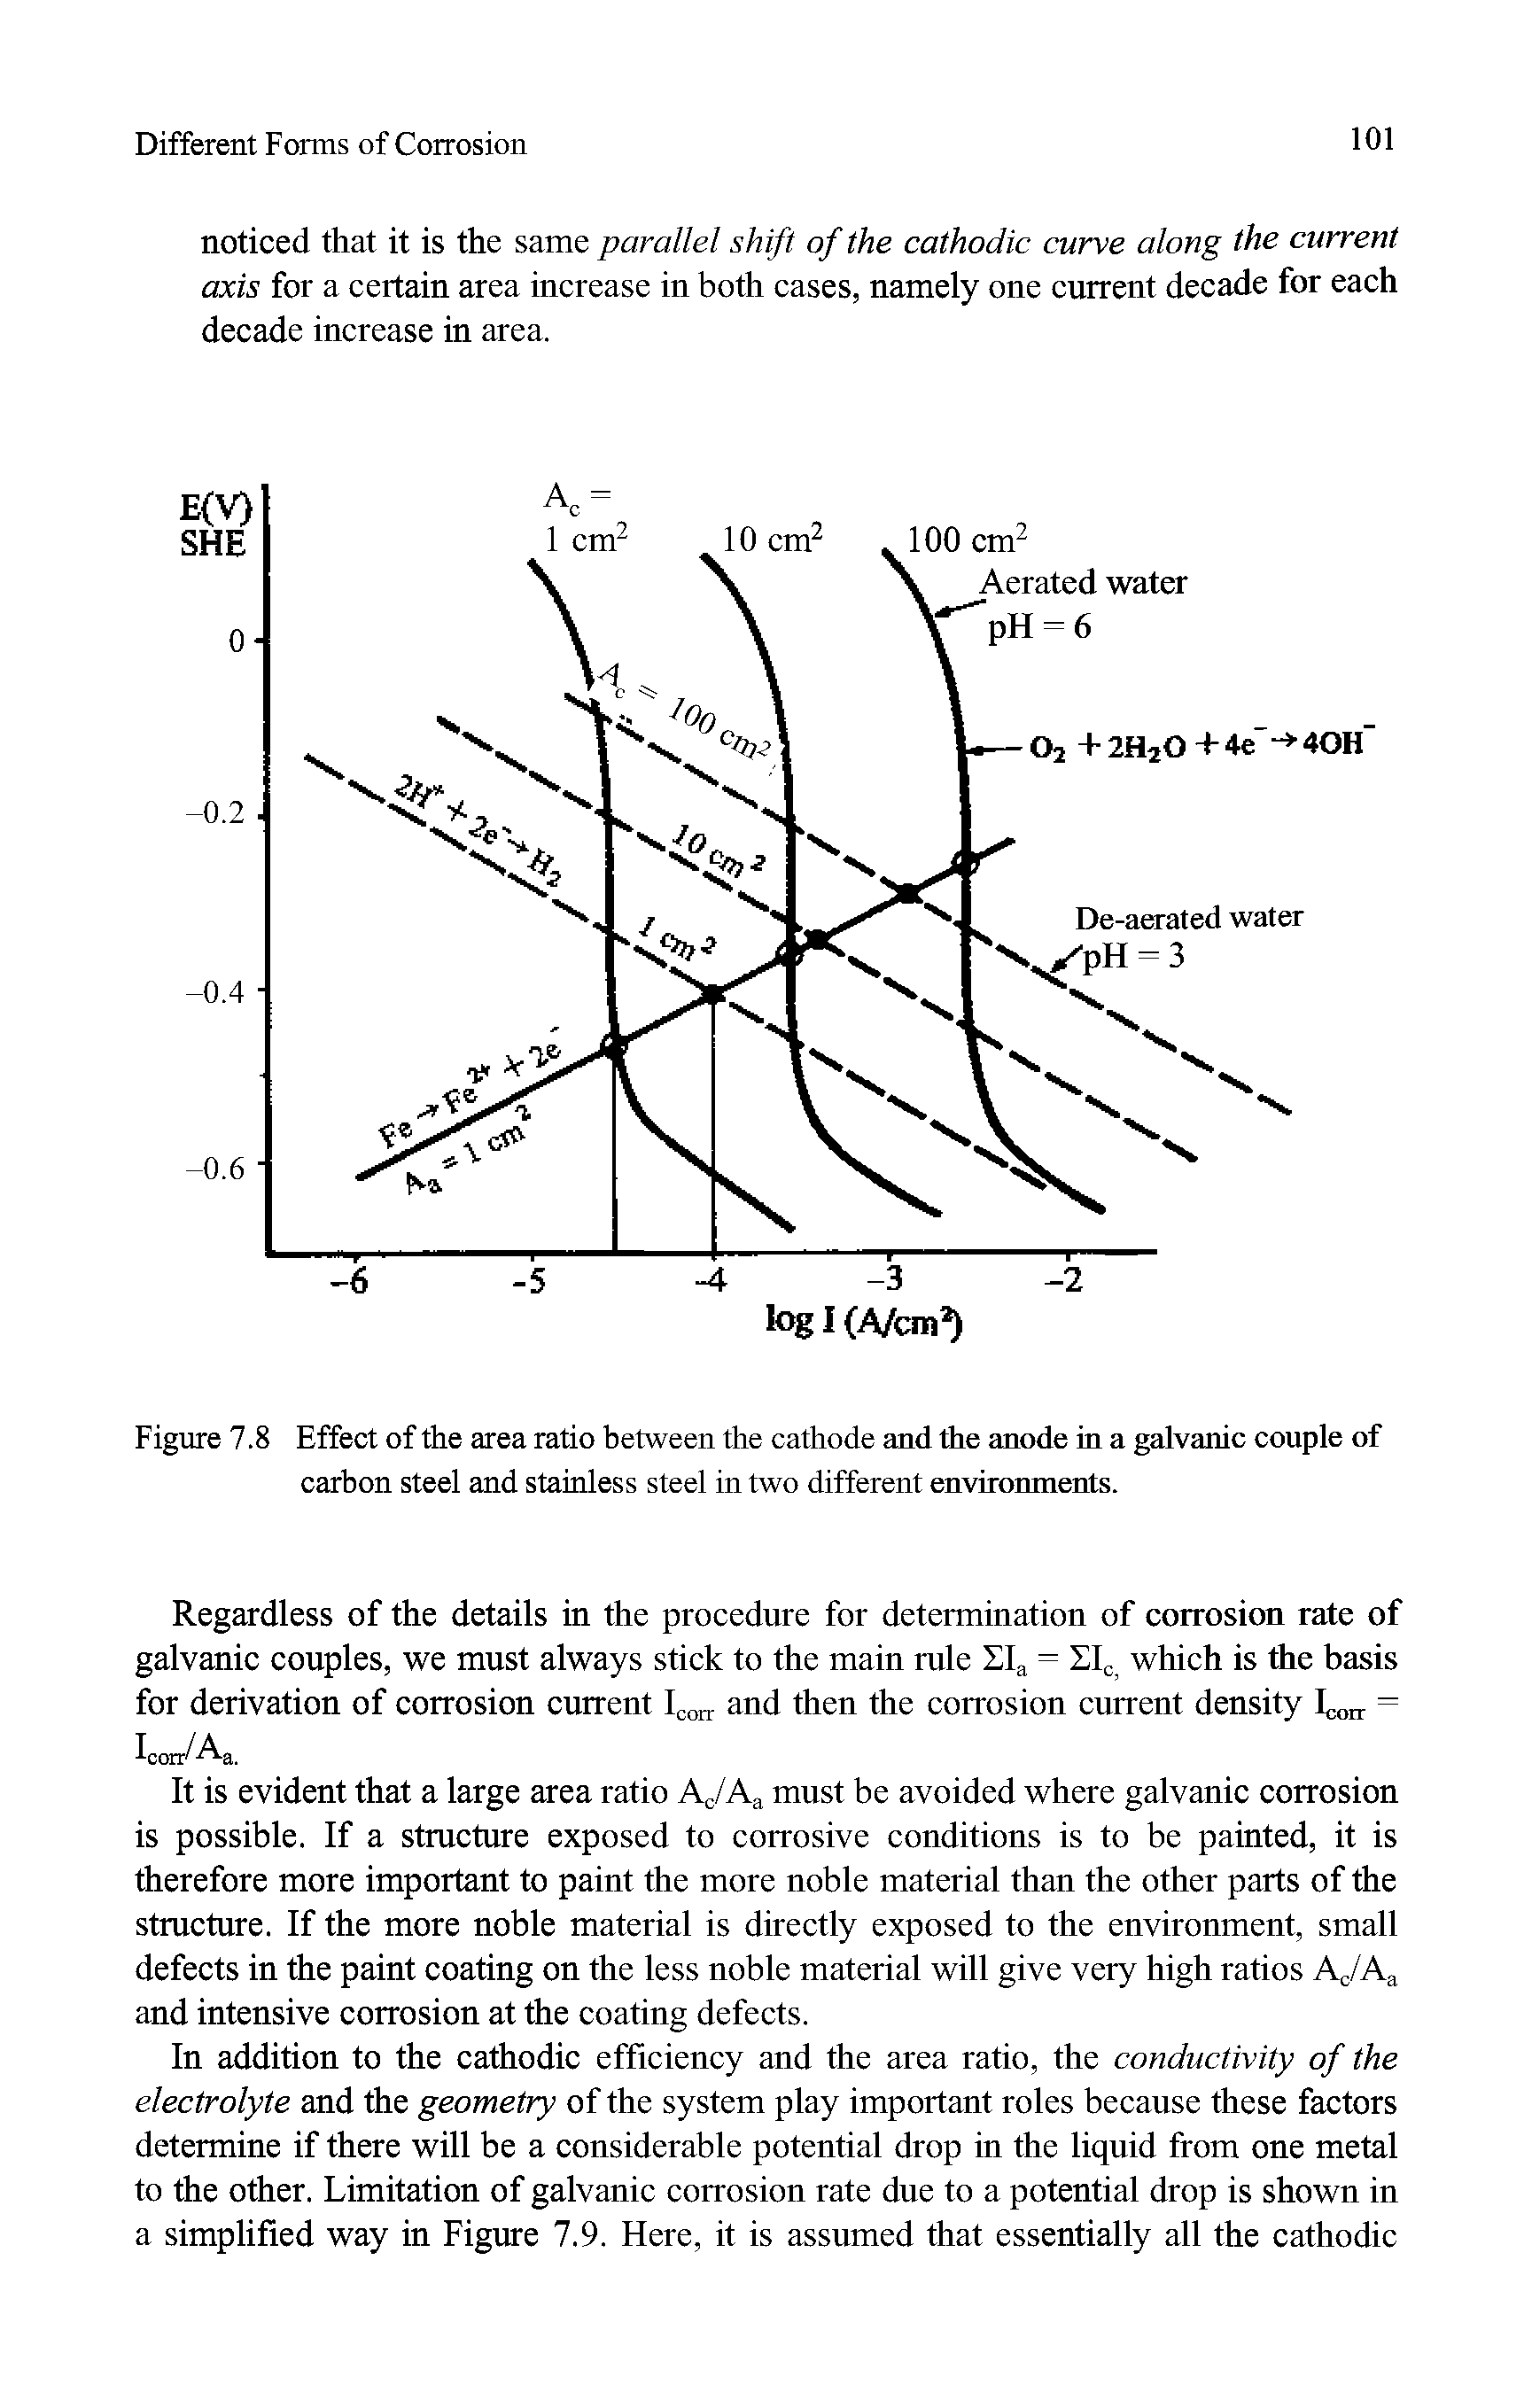 Figure 7.8 Effect of the area ratio between the cathode and the anode in a galvanic couple of carbon steel and stainless steel in two different environments.